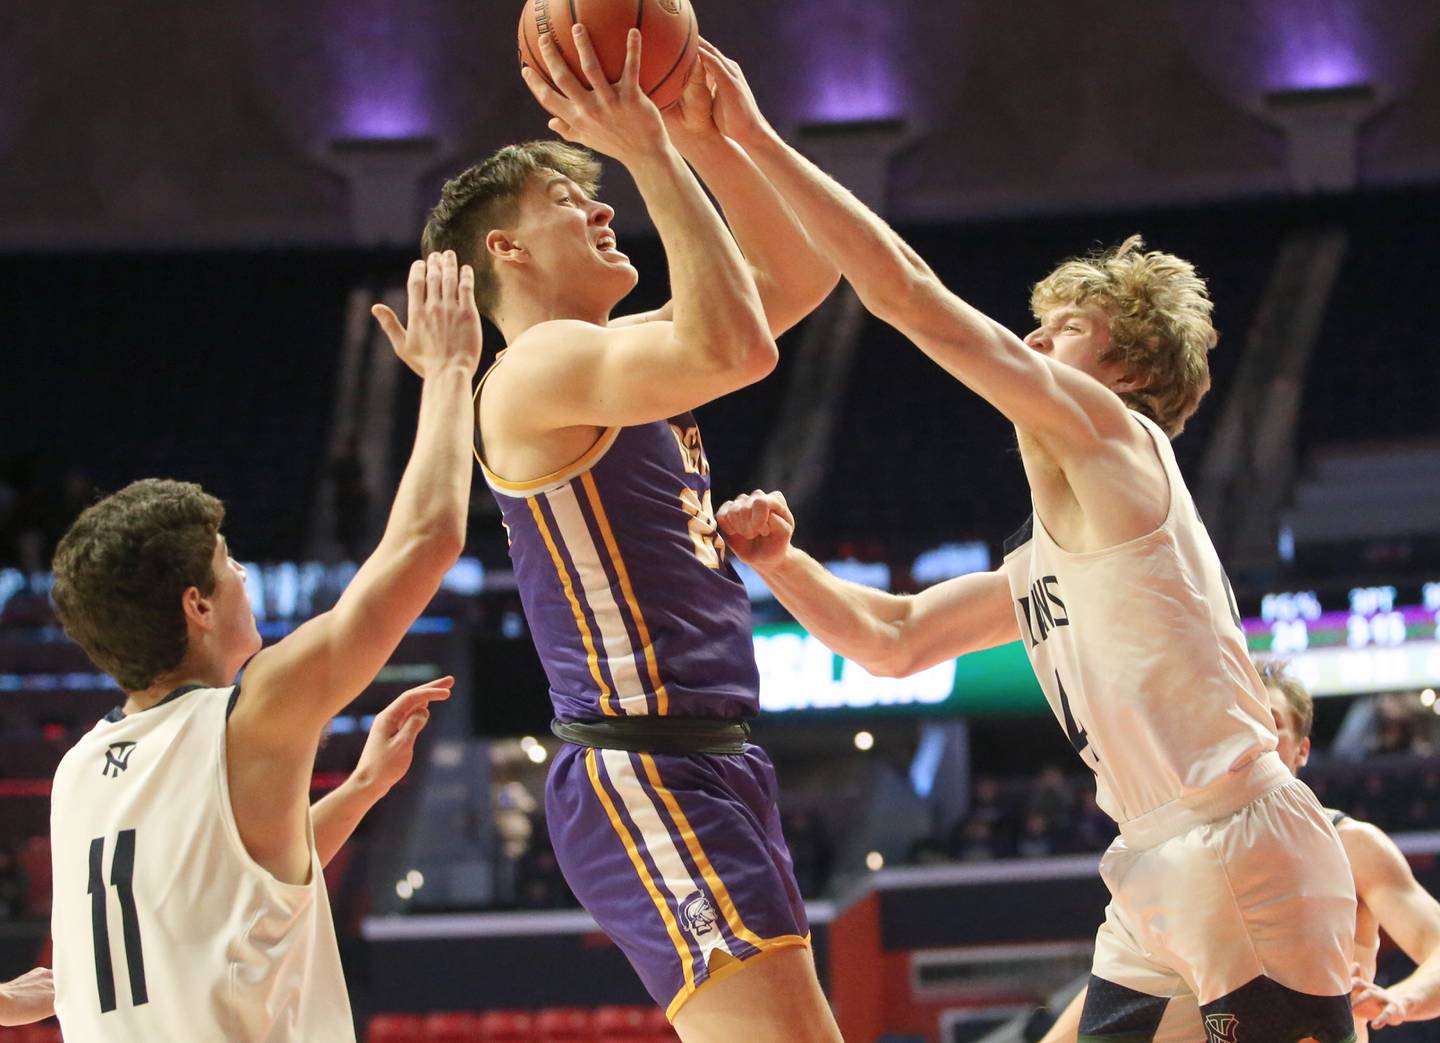 Downers Grove North's George Wolkow looks to shoot a jump shot as North Trier defenders Evan Kanellos and Ian Brown defend in the Class 4A state third place game on Friday, March 10, 2023 at the State Farm Center in Champaign.